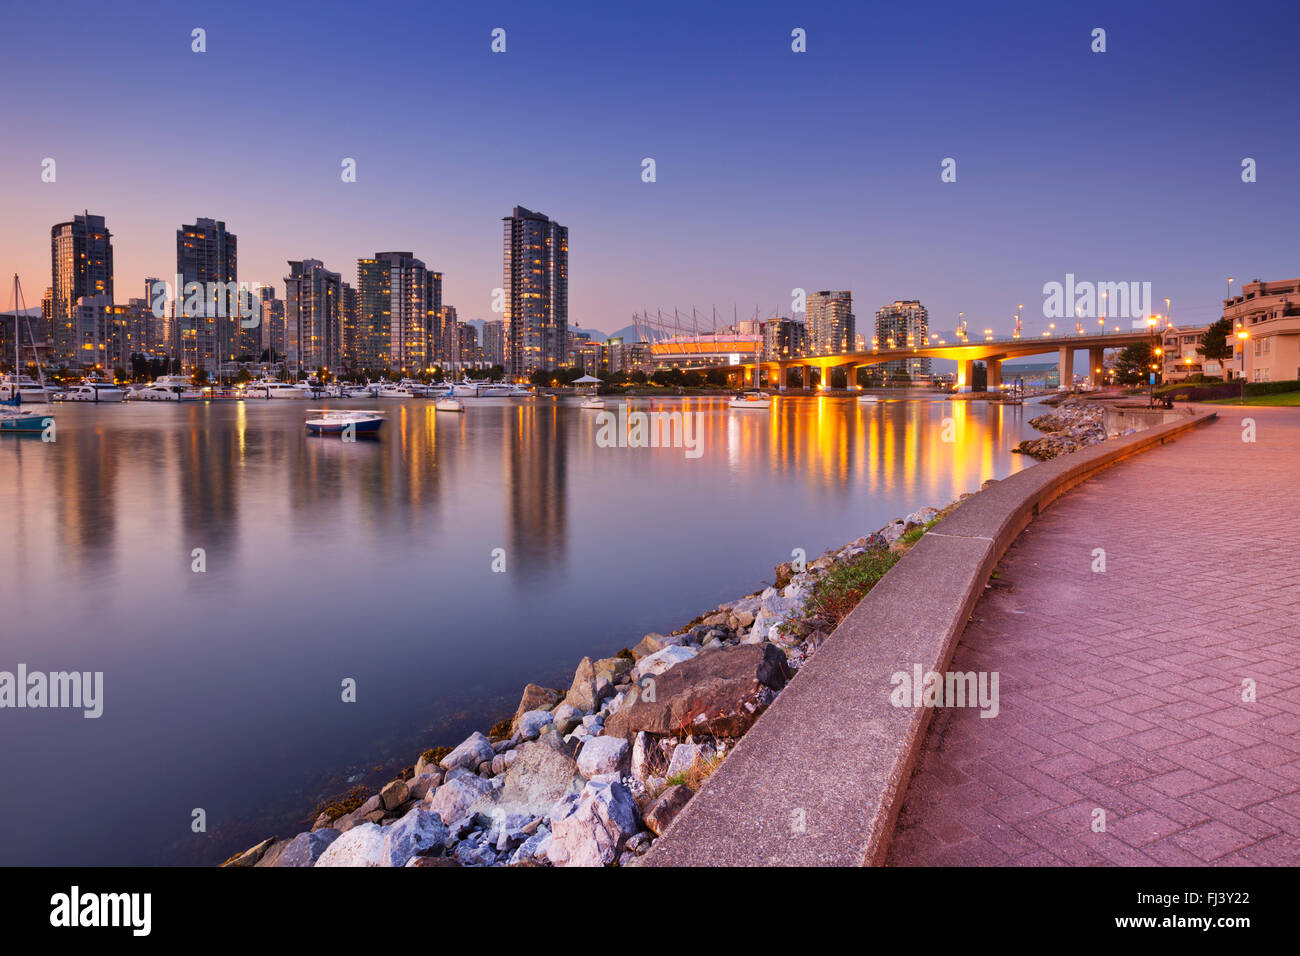 The skyline of Vancouver, British Columbia, Canada from across the water at dusk. Stock Photo